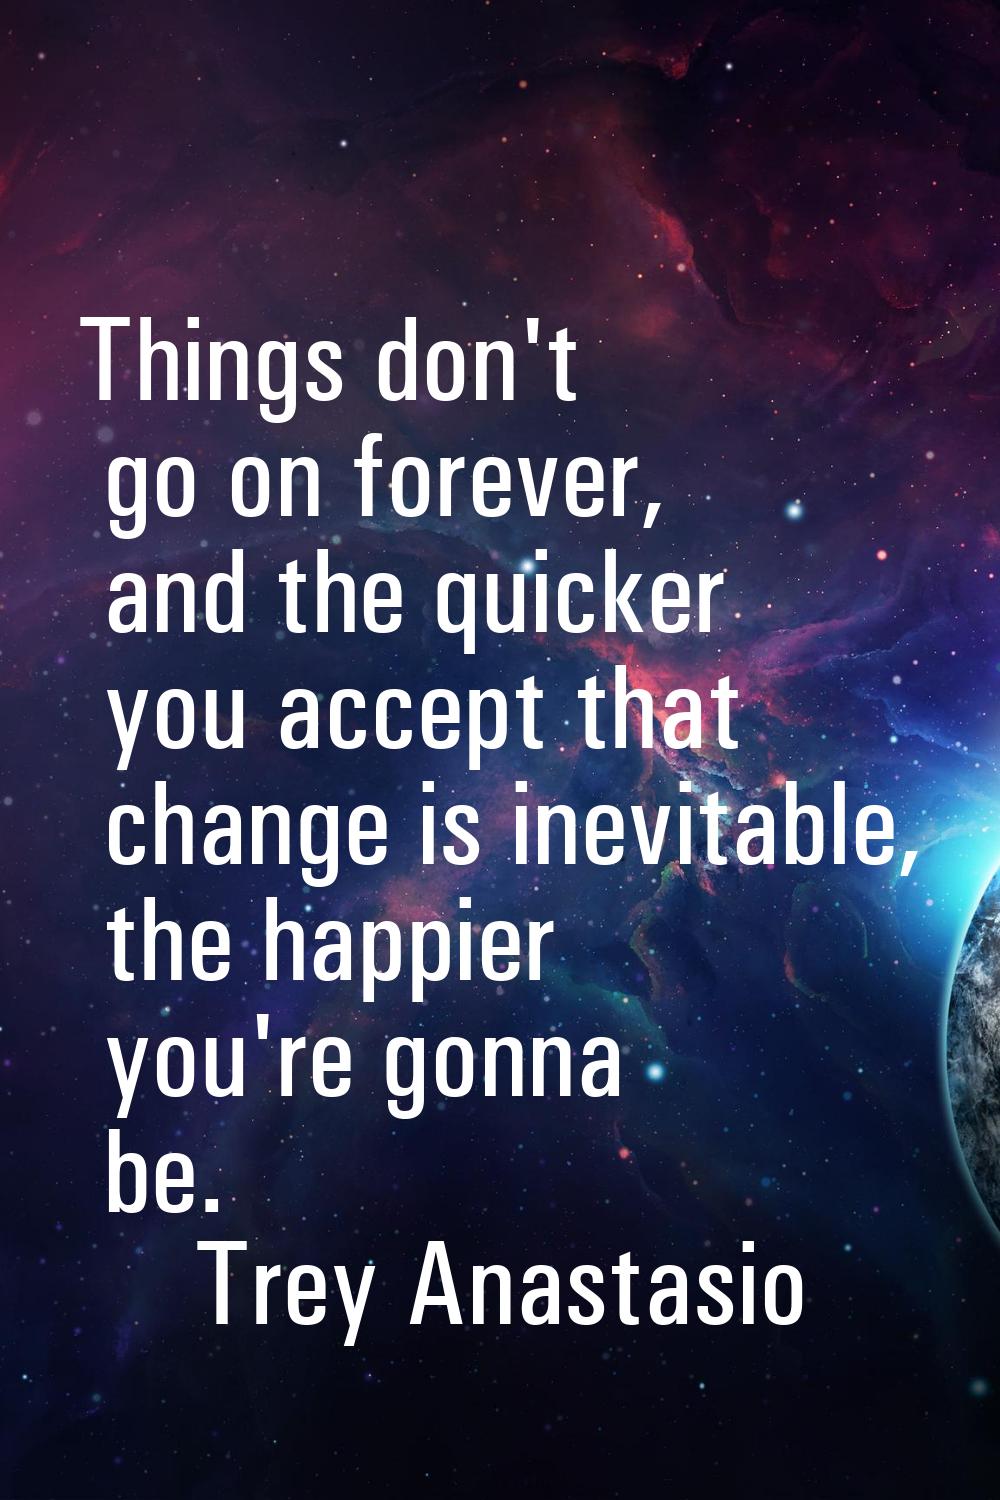 Things don't go on forever, and the quicker you accept that change is inevitable, the happier you'r